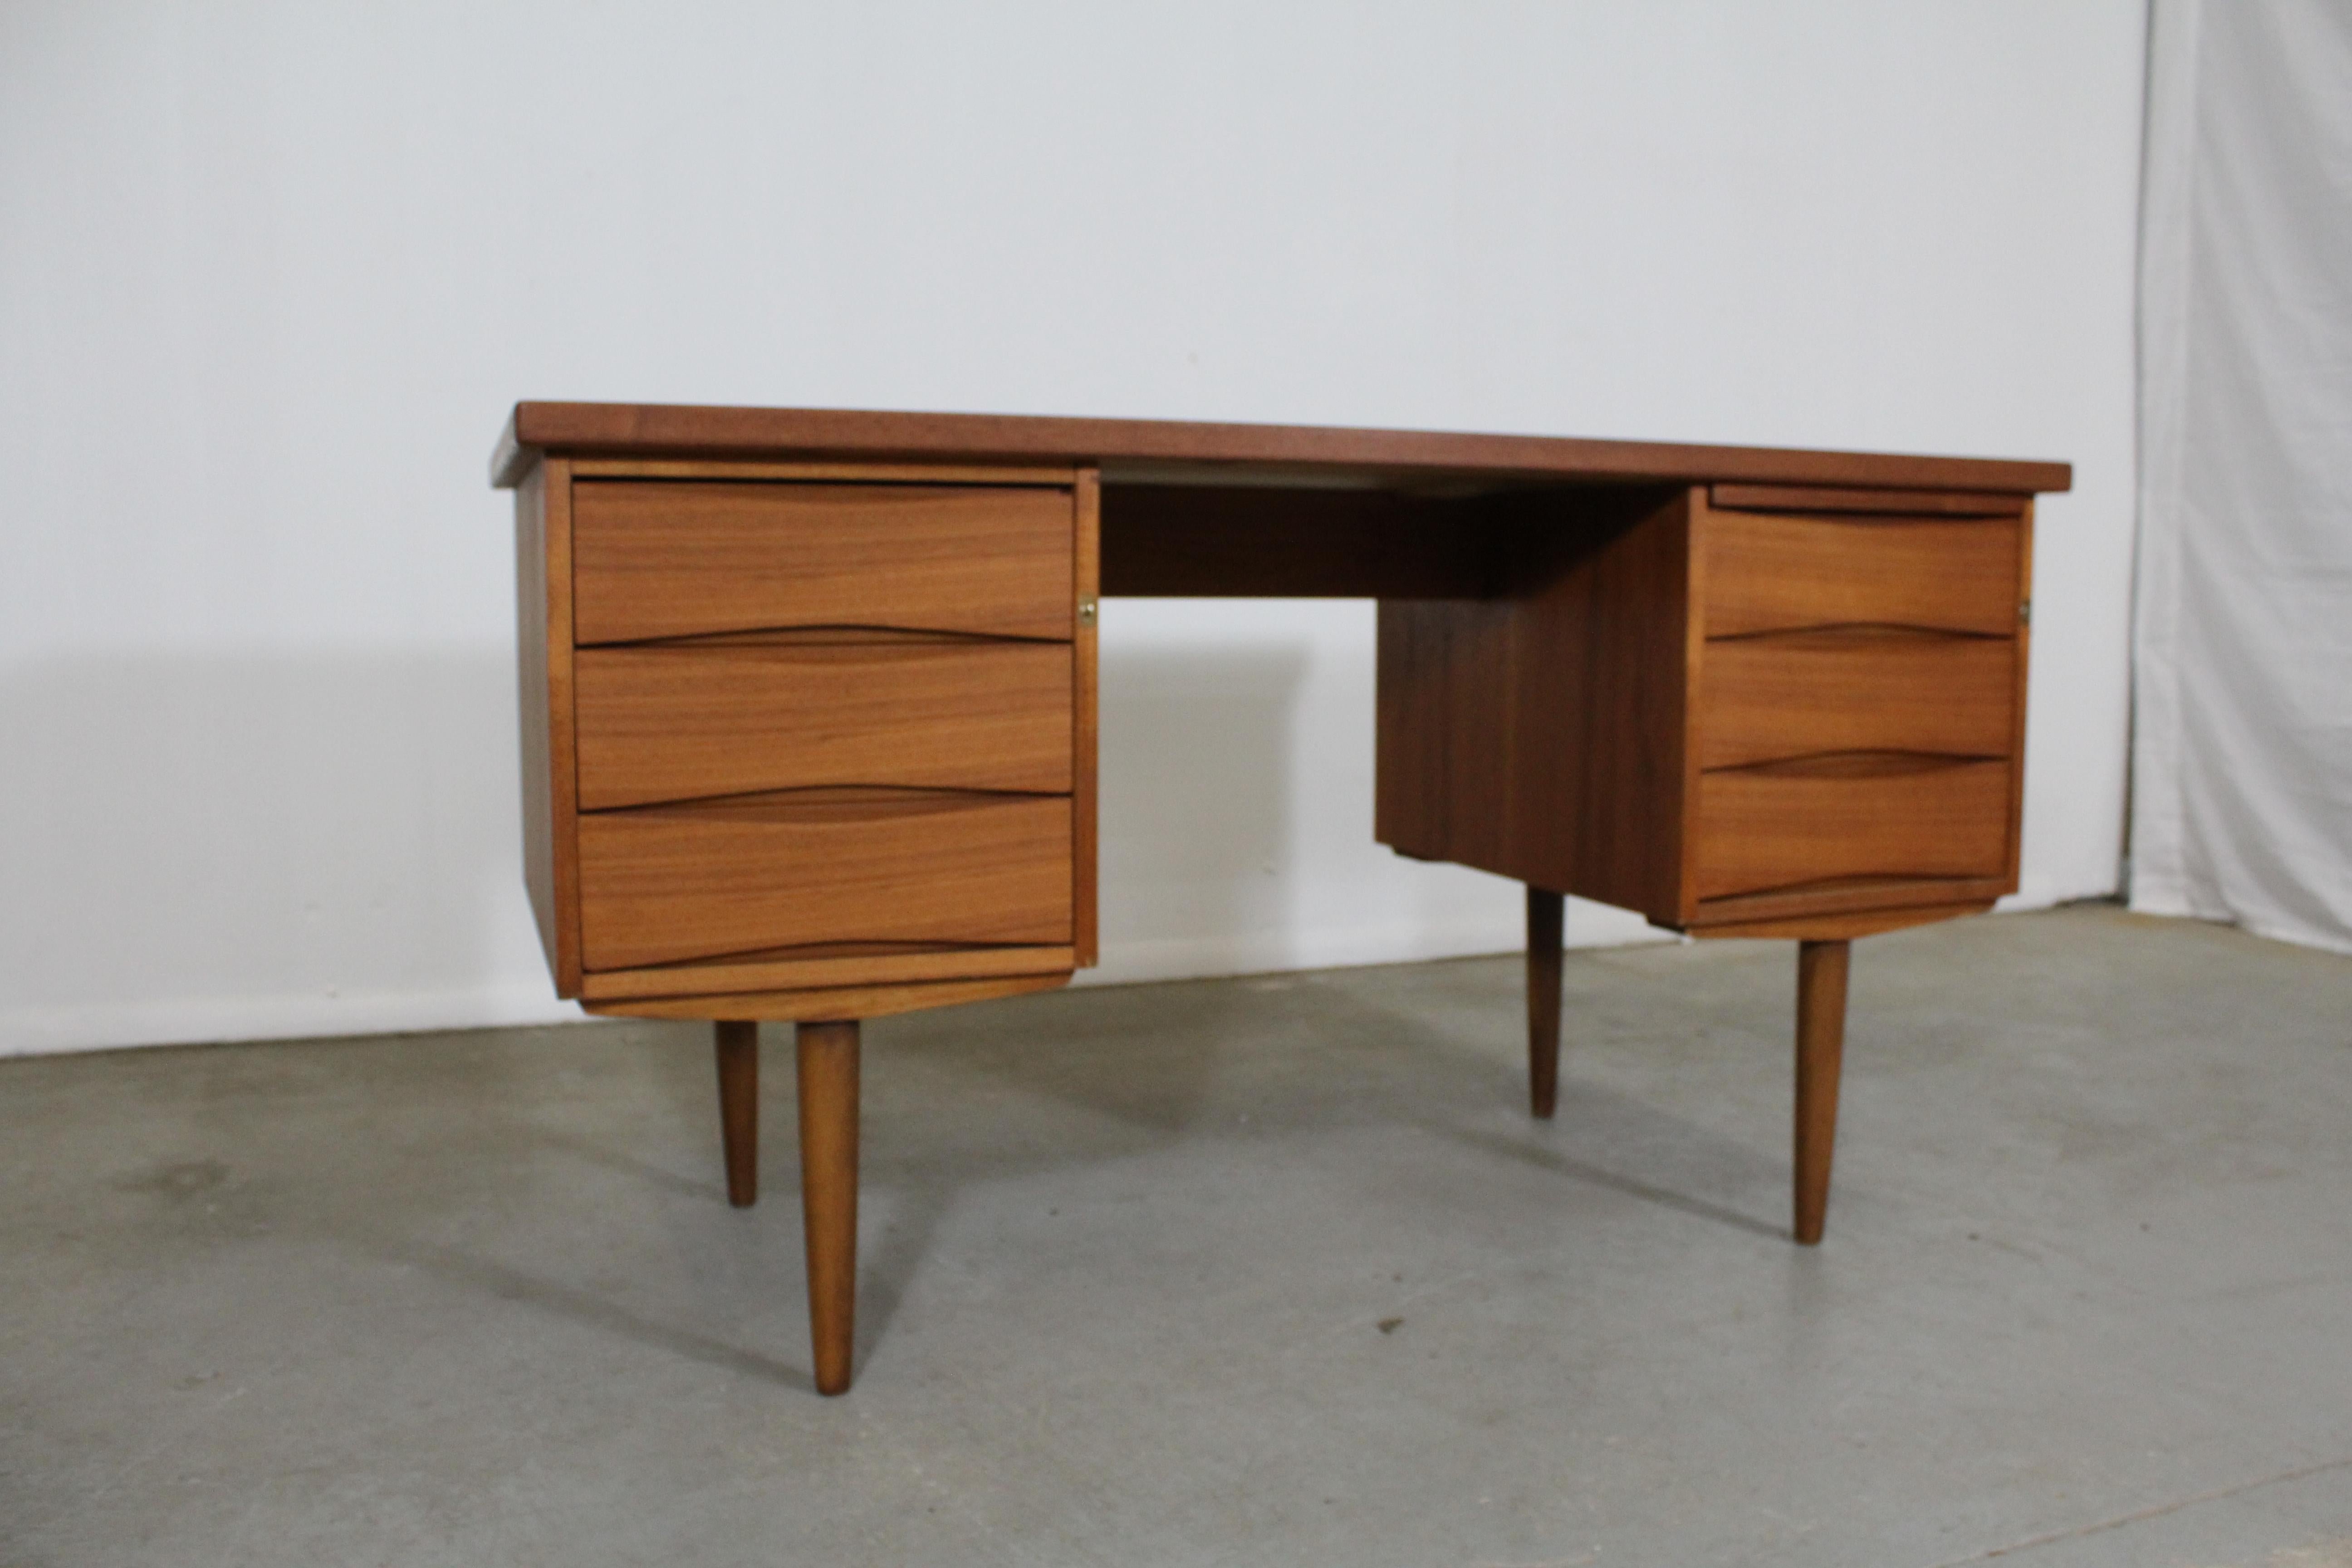 Danish modern Arne Vodder style desk on pencil legs.

Offered is a very cool midcentury Danish modern teak desk. This piece is made of teak. It is similar to the style of Arne Vodder. It has three drawers on either side and a pull out (see